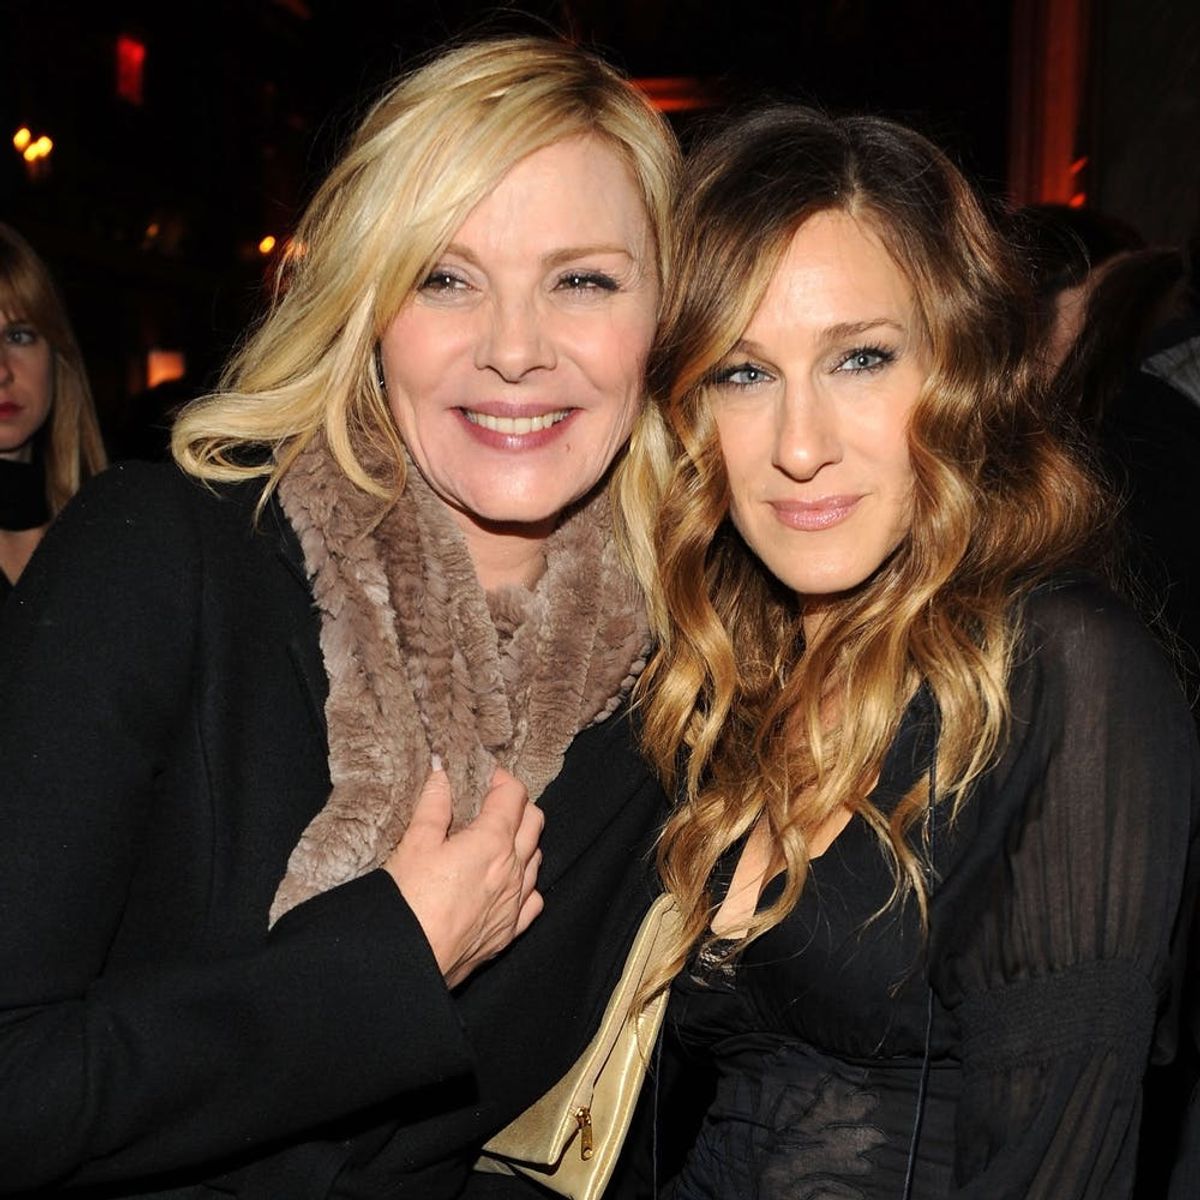 Sarah Jessica Parker Says She Was ‘Heartbroken’ by Kim Cattrall’s ‘SATC’ Comments